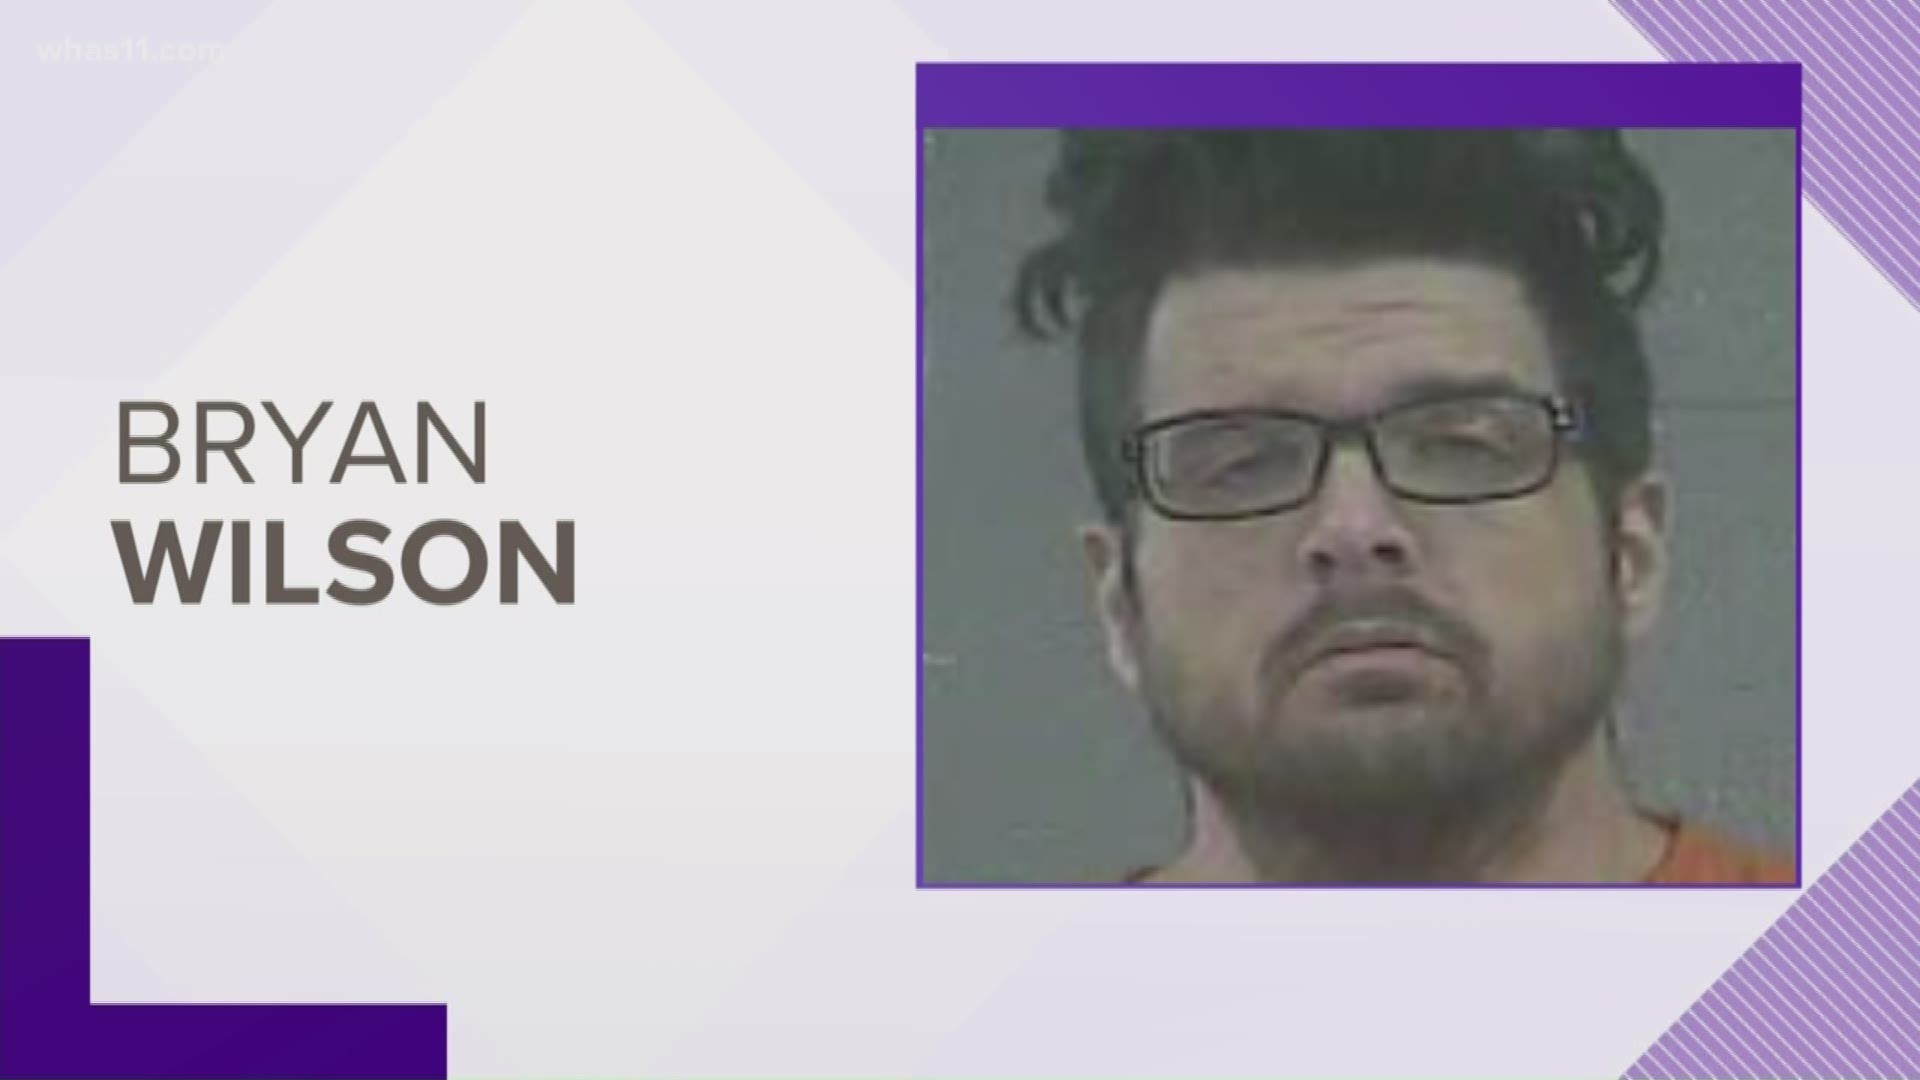 Bryan Wilson is charged with 100 counts of distributing child porn and 30 charges of possession of child porn.